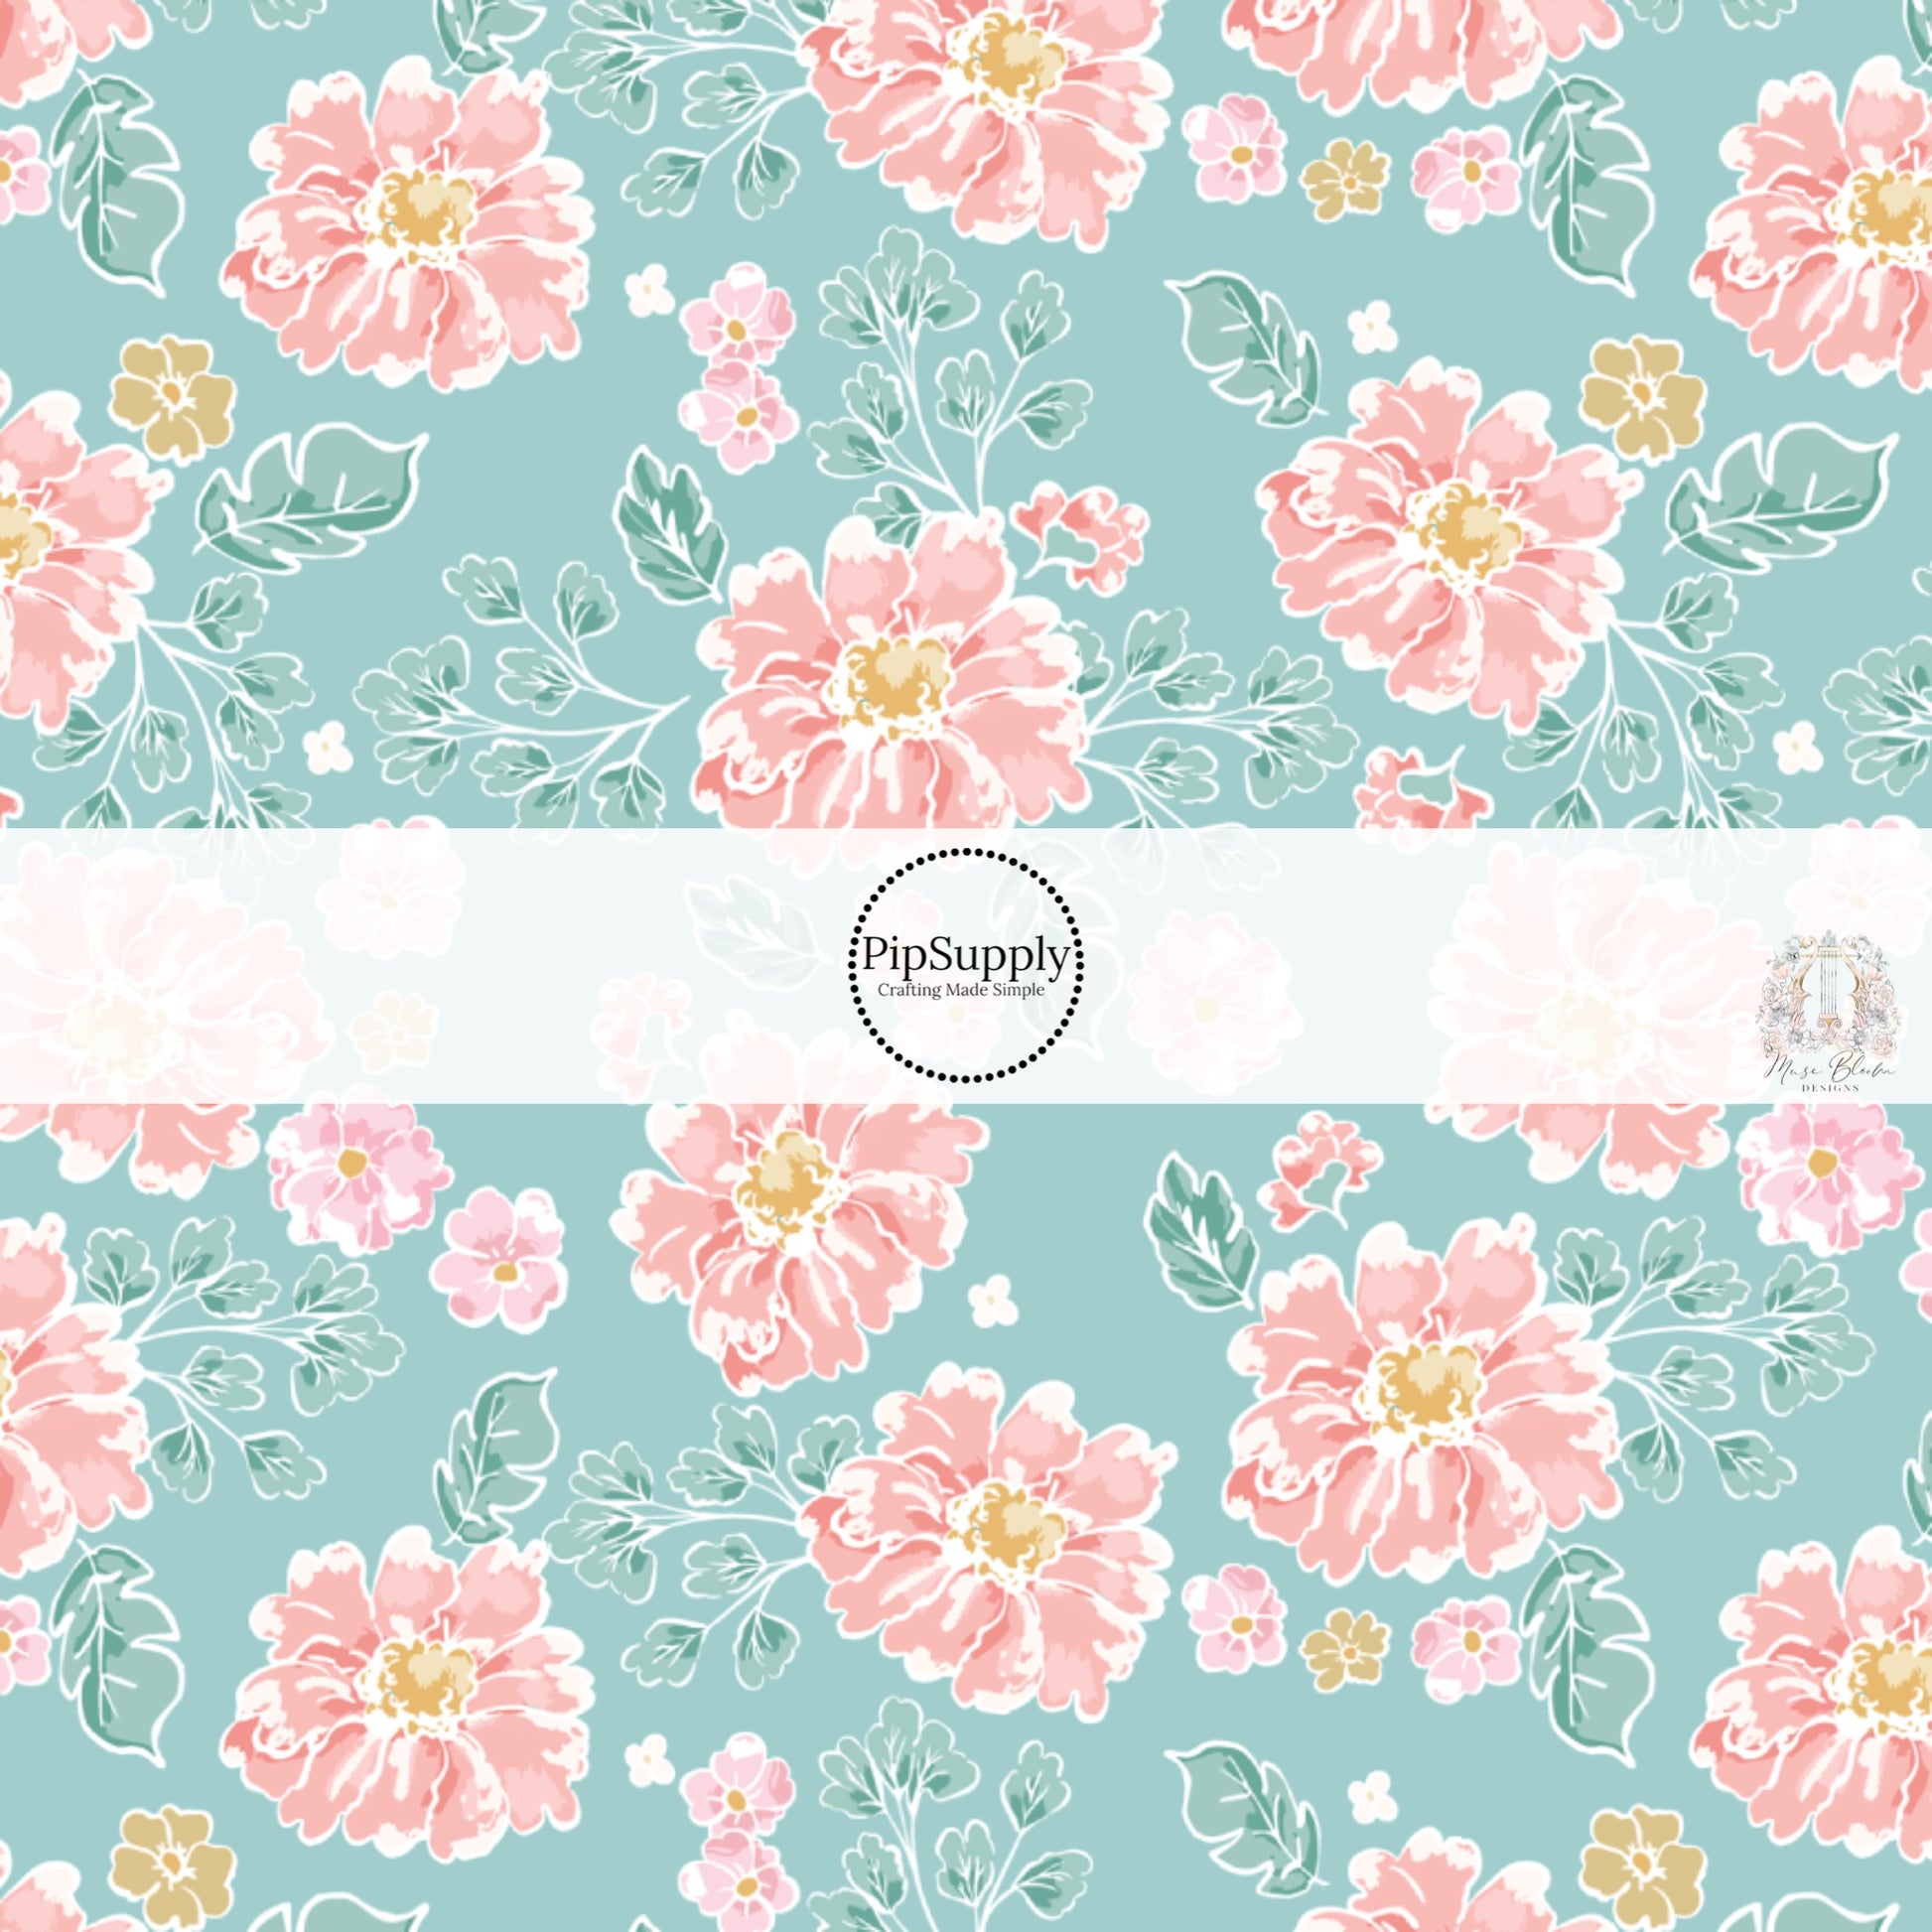 These floral themed light seafoam no sew bow strips can be easily tied and attached to a clip for a finished hair bow. These fun summer floral themed bow strips features light peach, cream, and teal flowers on seafoam are great for personal use or to sell.